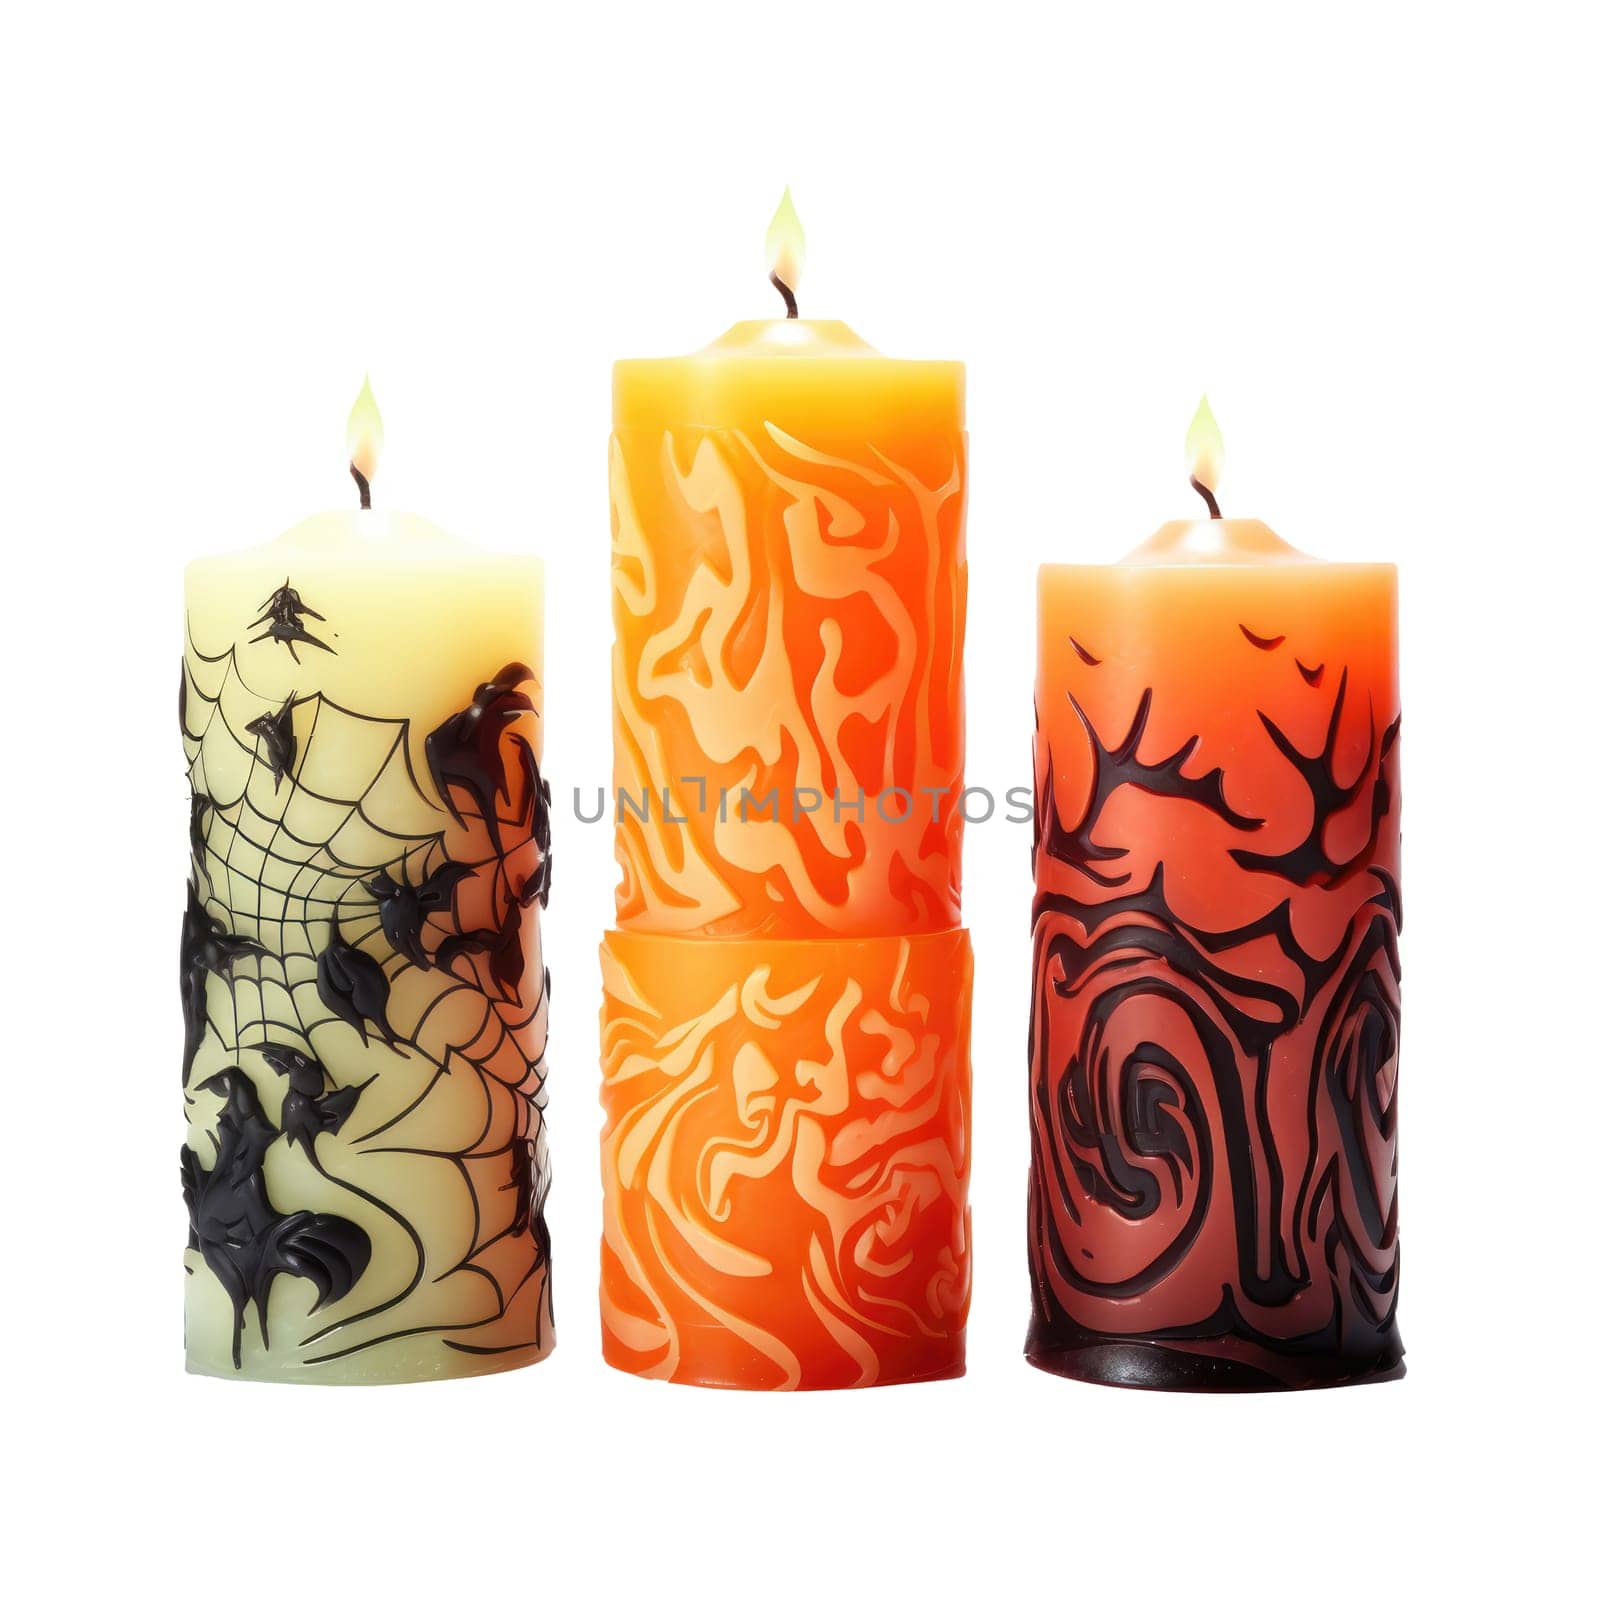 Halloween candles on white background. Isolated ominous candles for holiday or witch fortune telling